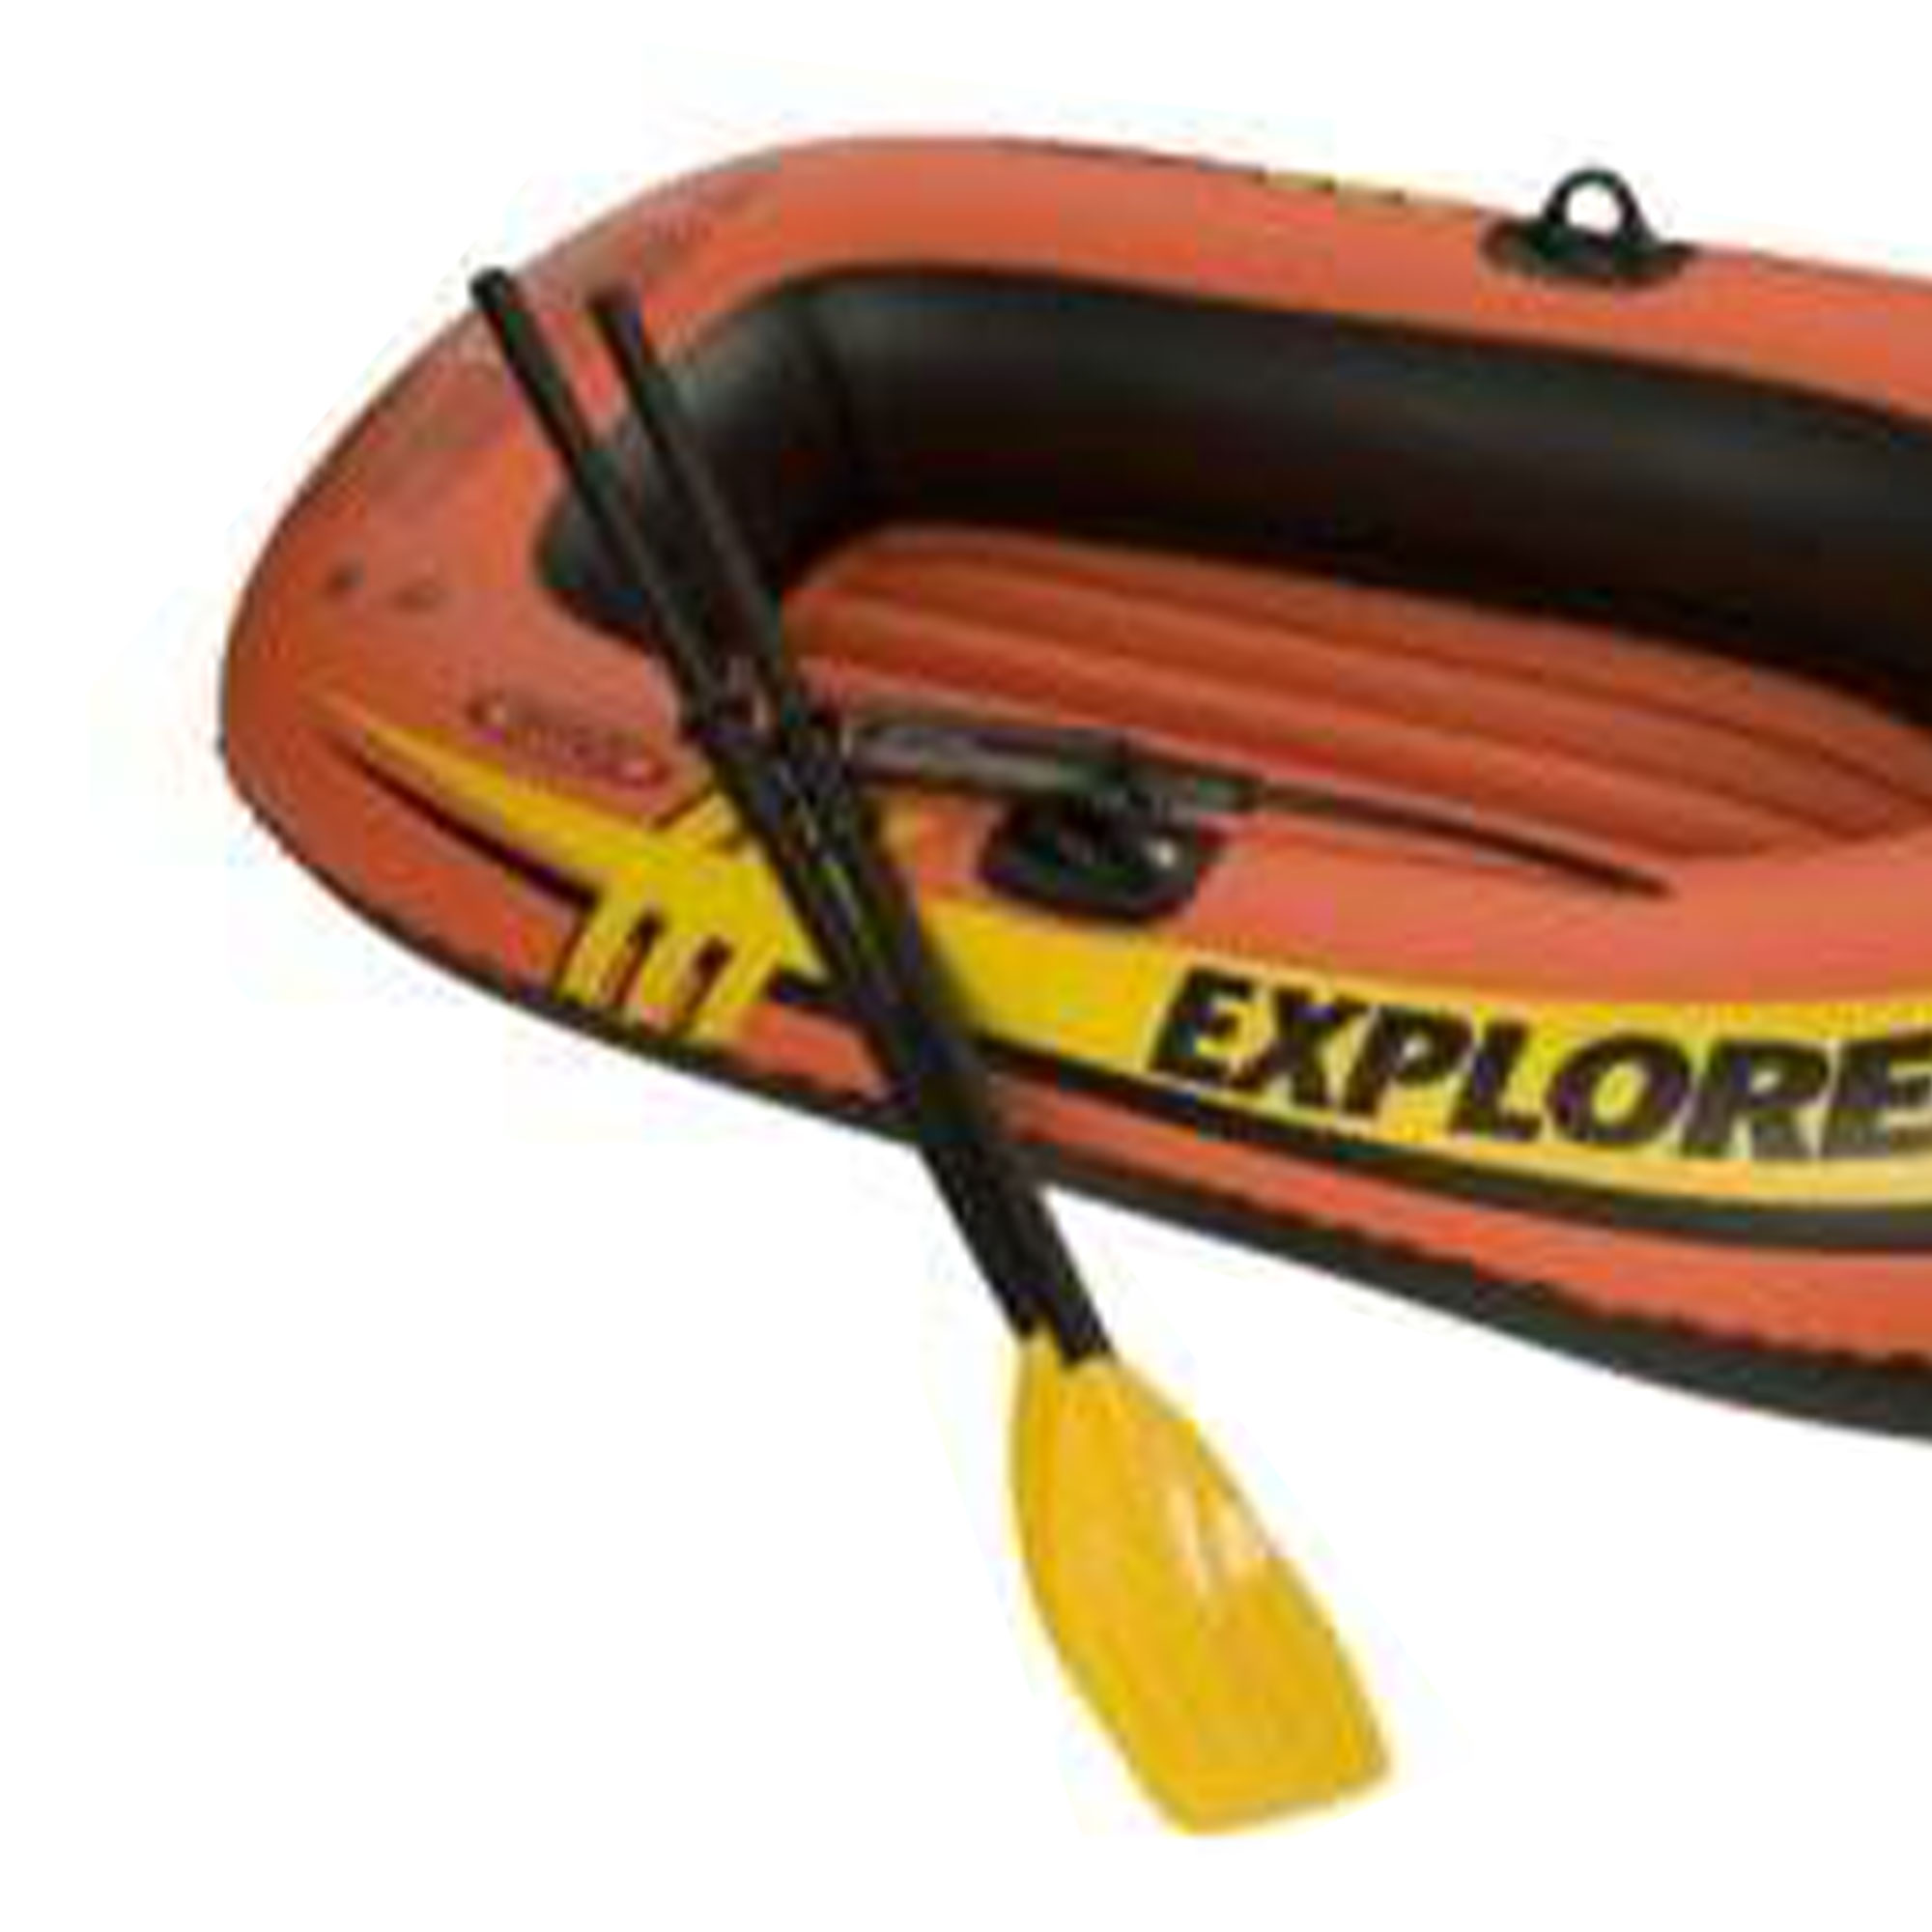 Intex Explorer 200 Inflatable 2 Person River Boat Raft w/ Oars & Pump (2 Pack) - image 5 of 6